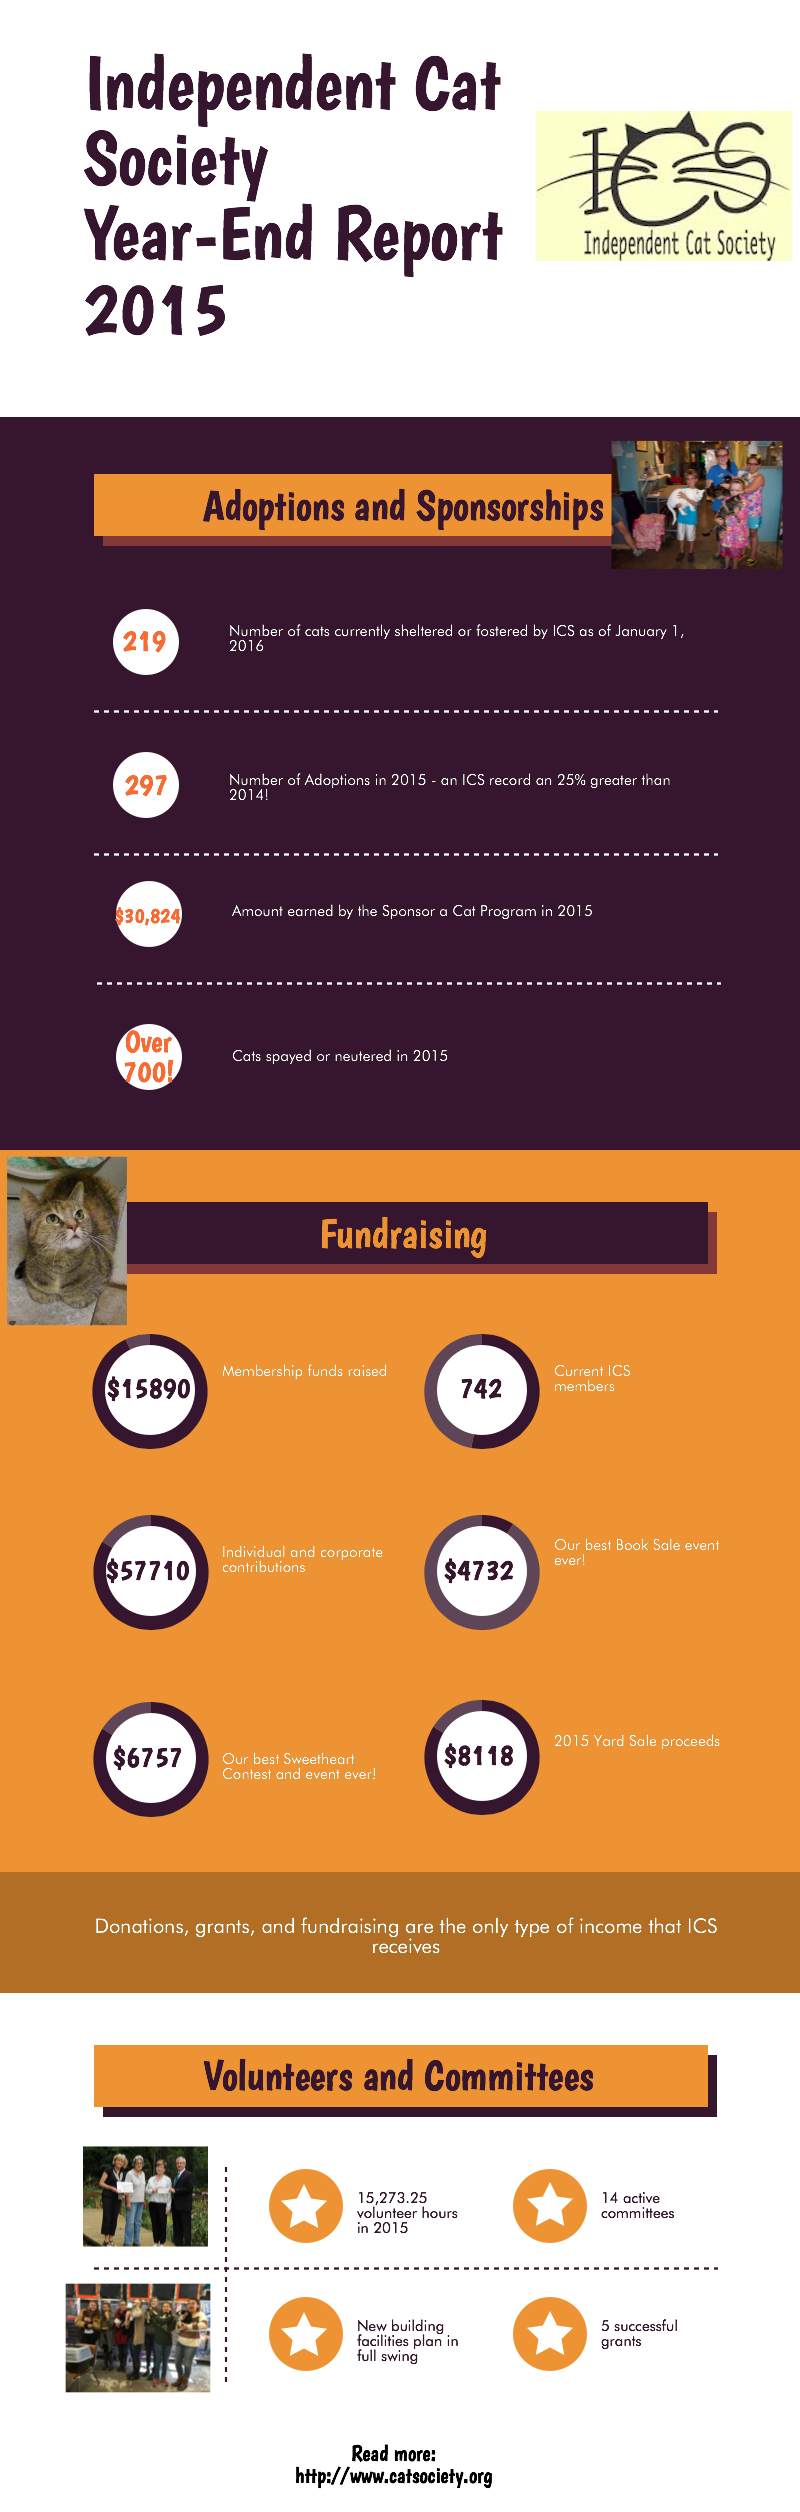 2015 Year-end Report Infographic